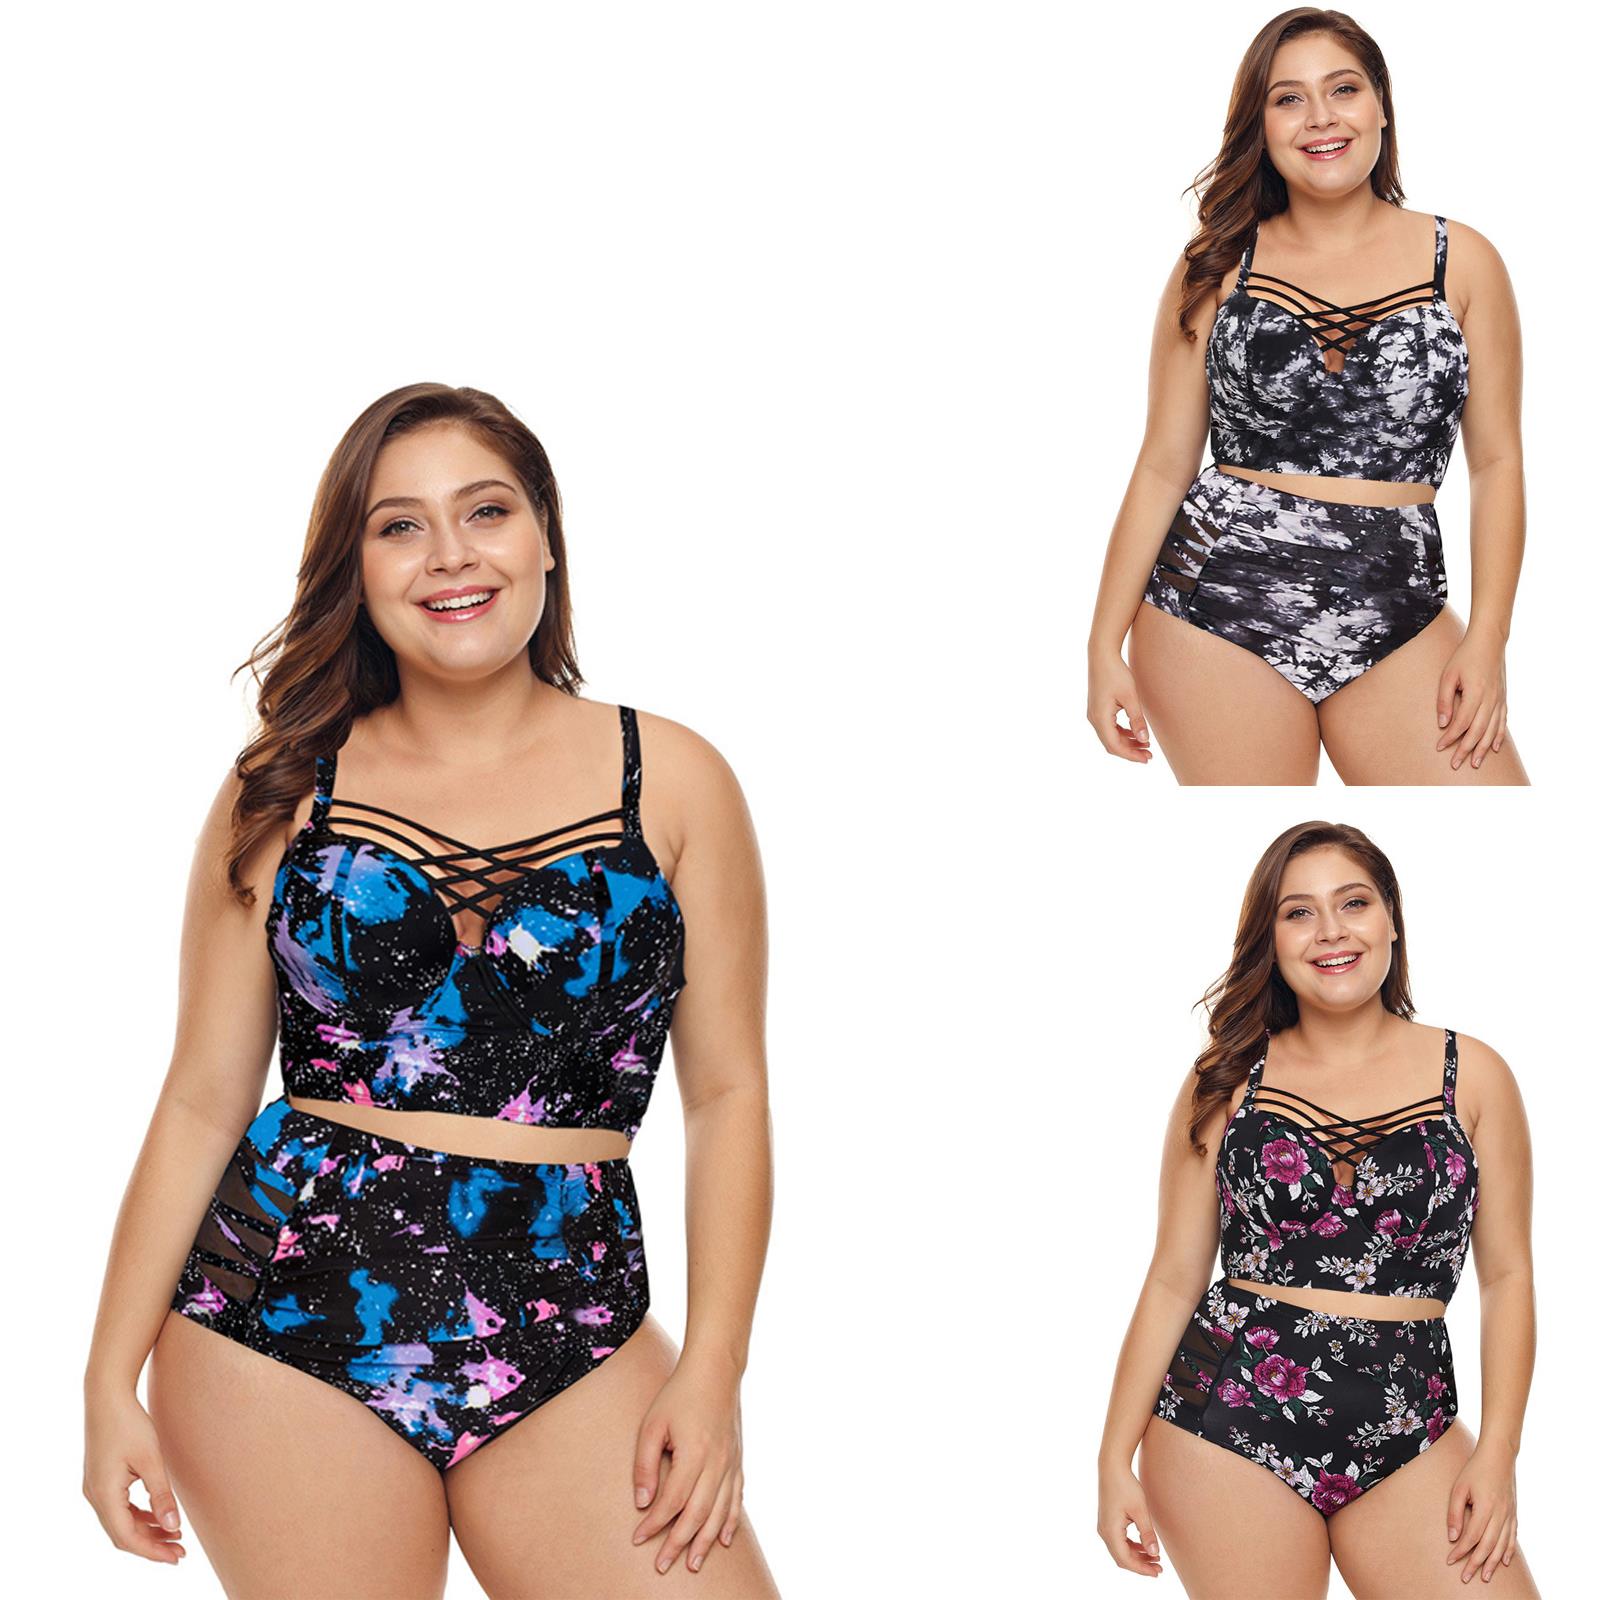 OIENS Tankini Swimsuits for Women Two Piece Bathing Suits Tummy Control Swimsuits Bathing Suit Plus Size Swimsuits Swimming Suit - image 4 of 5